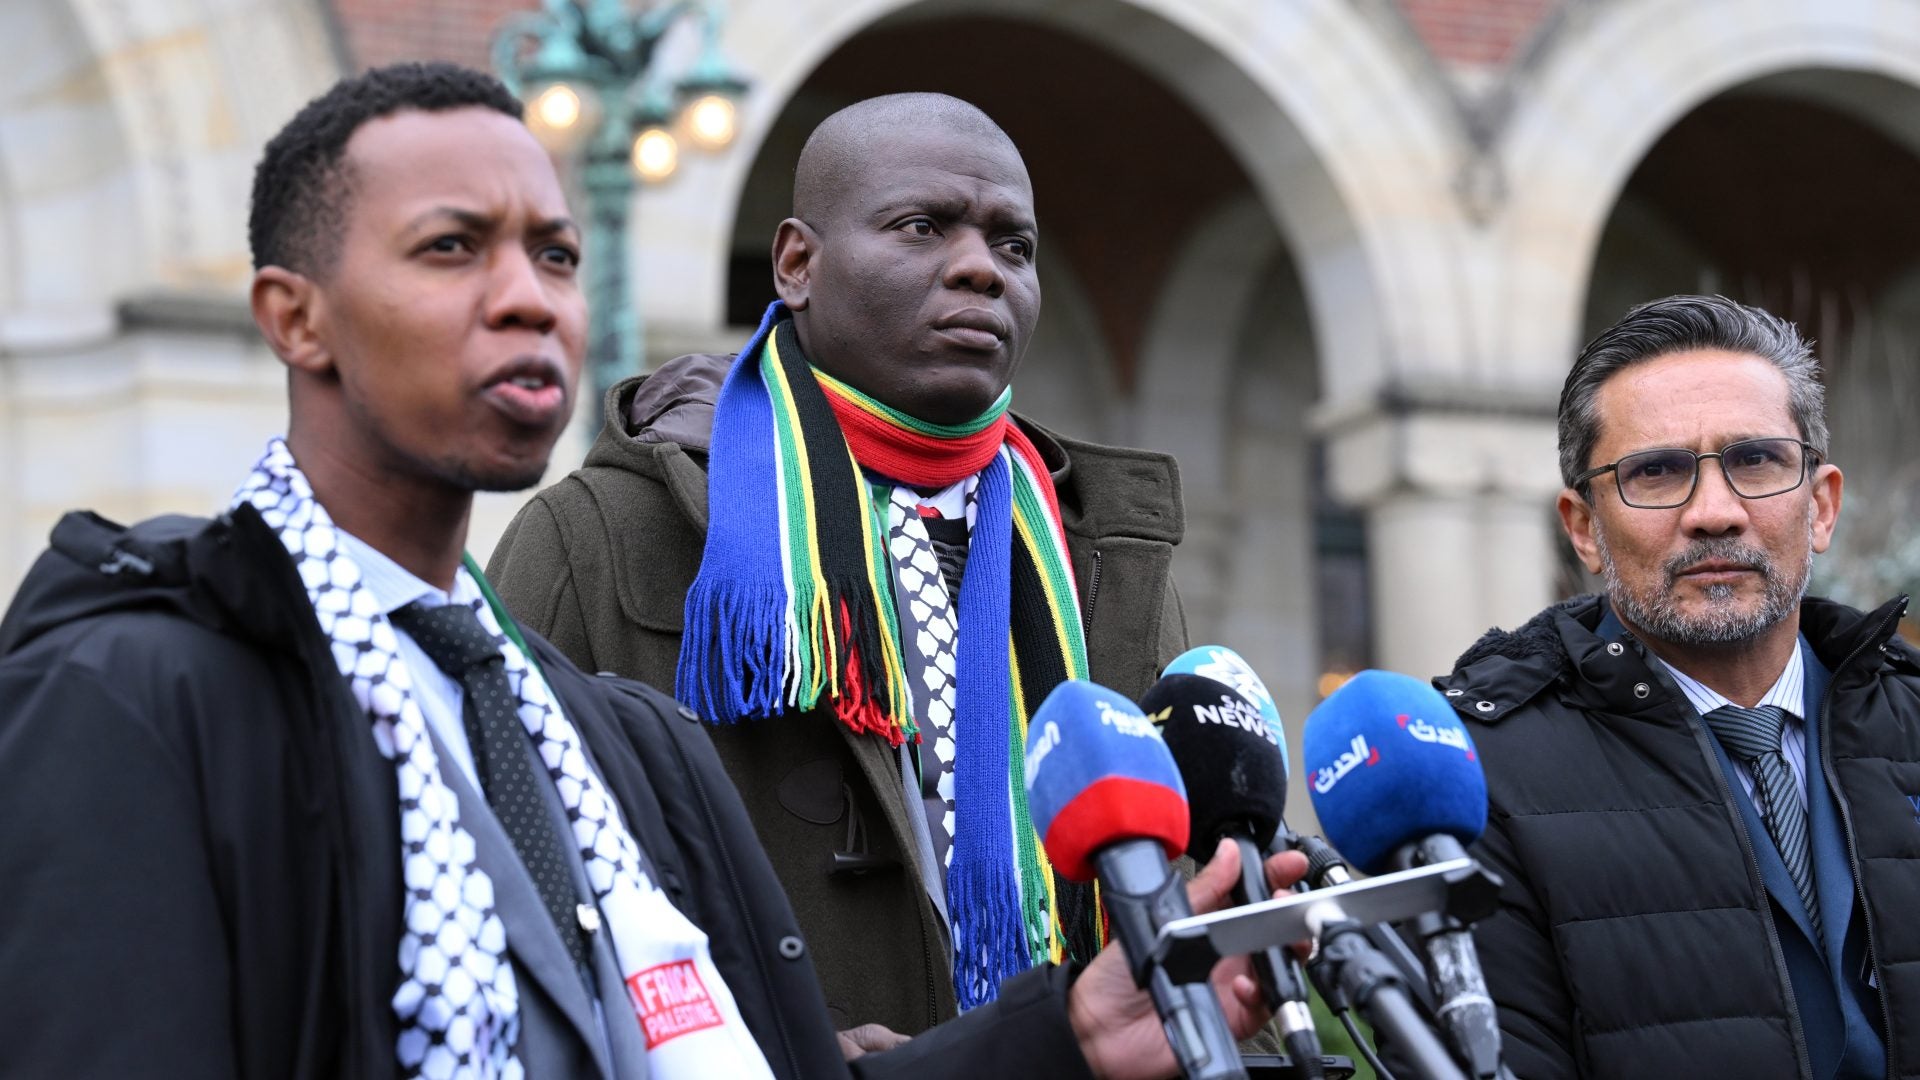 Here’s What You Need To Know About South Africa’s Genocide Case Against Israel